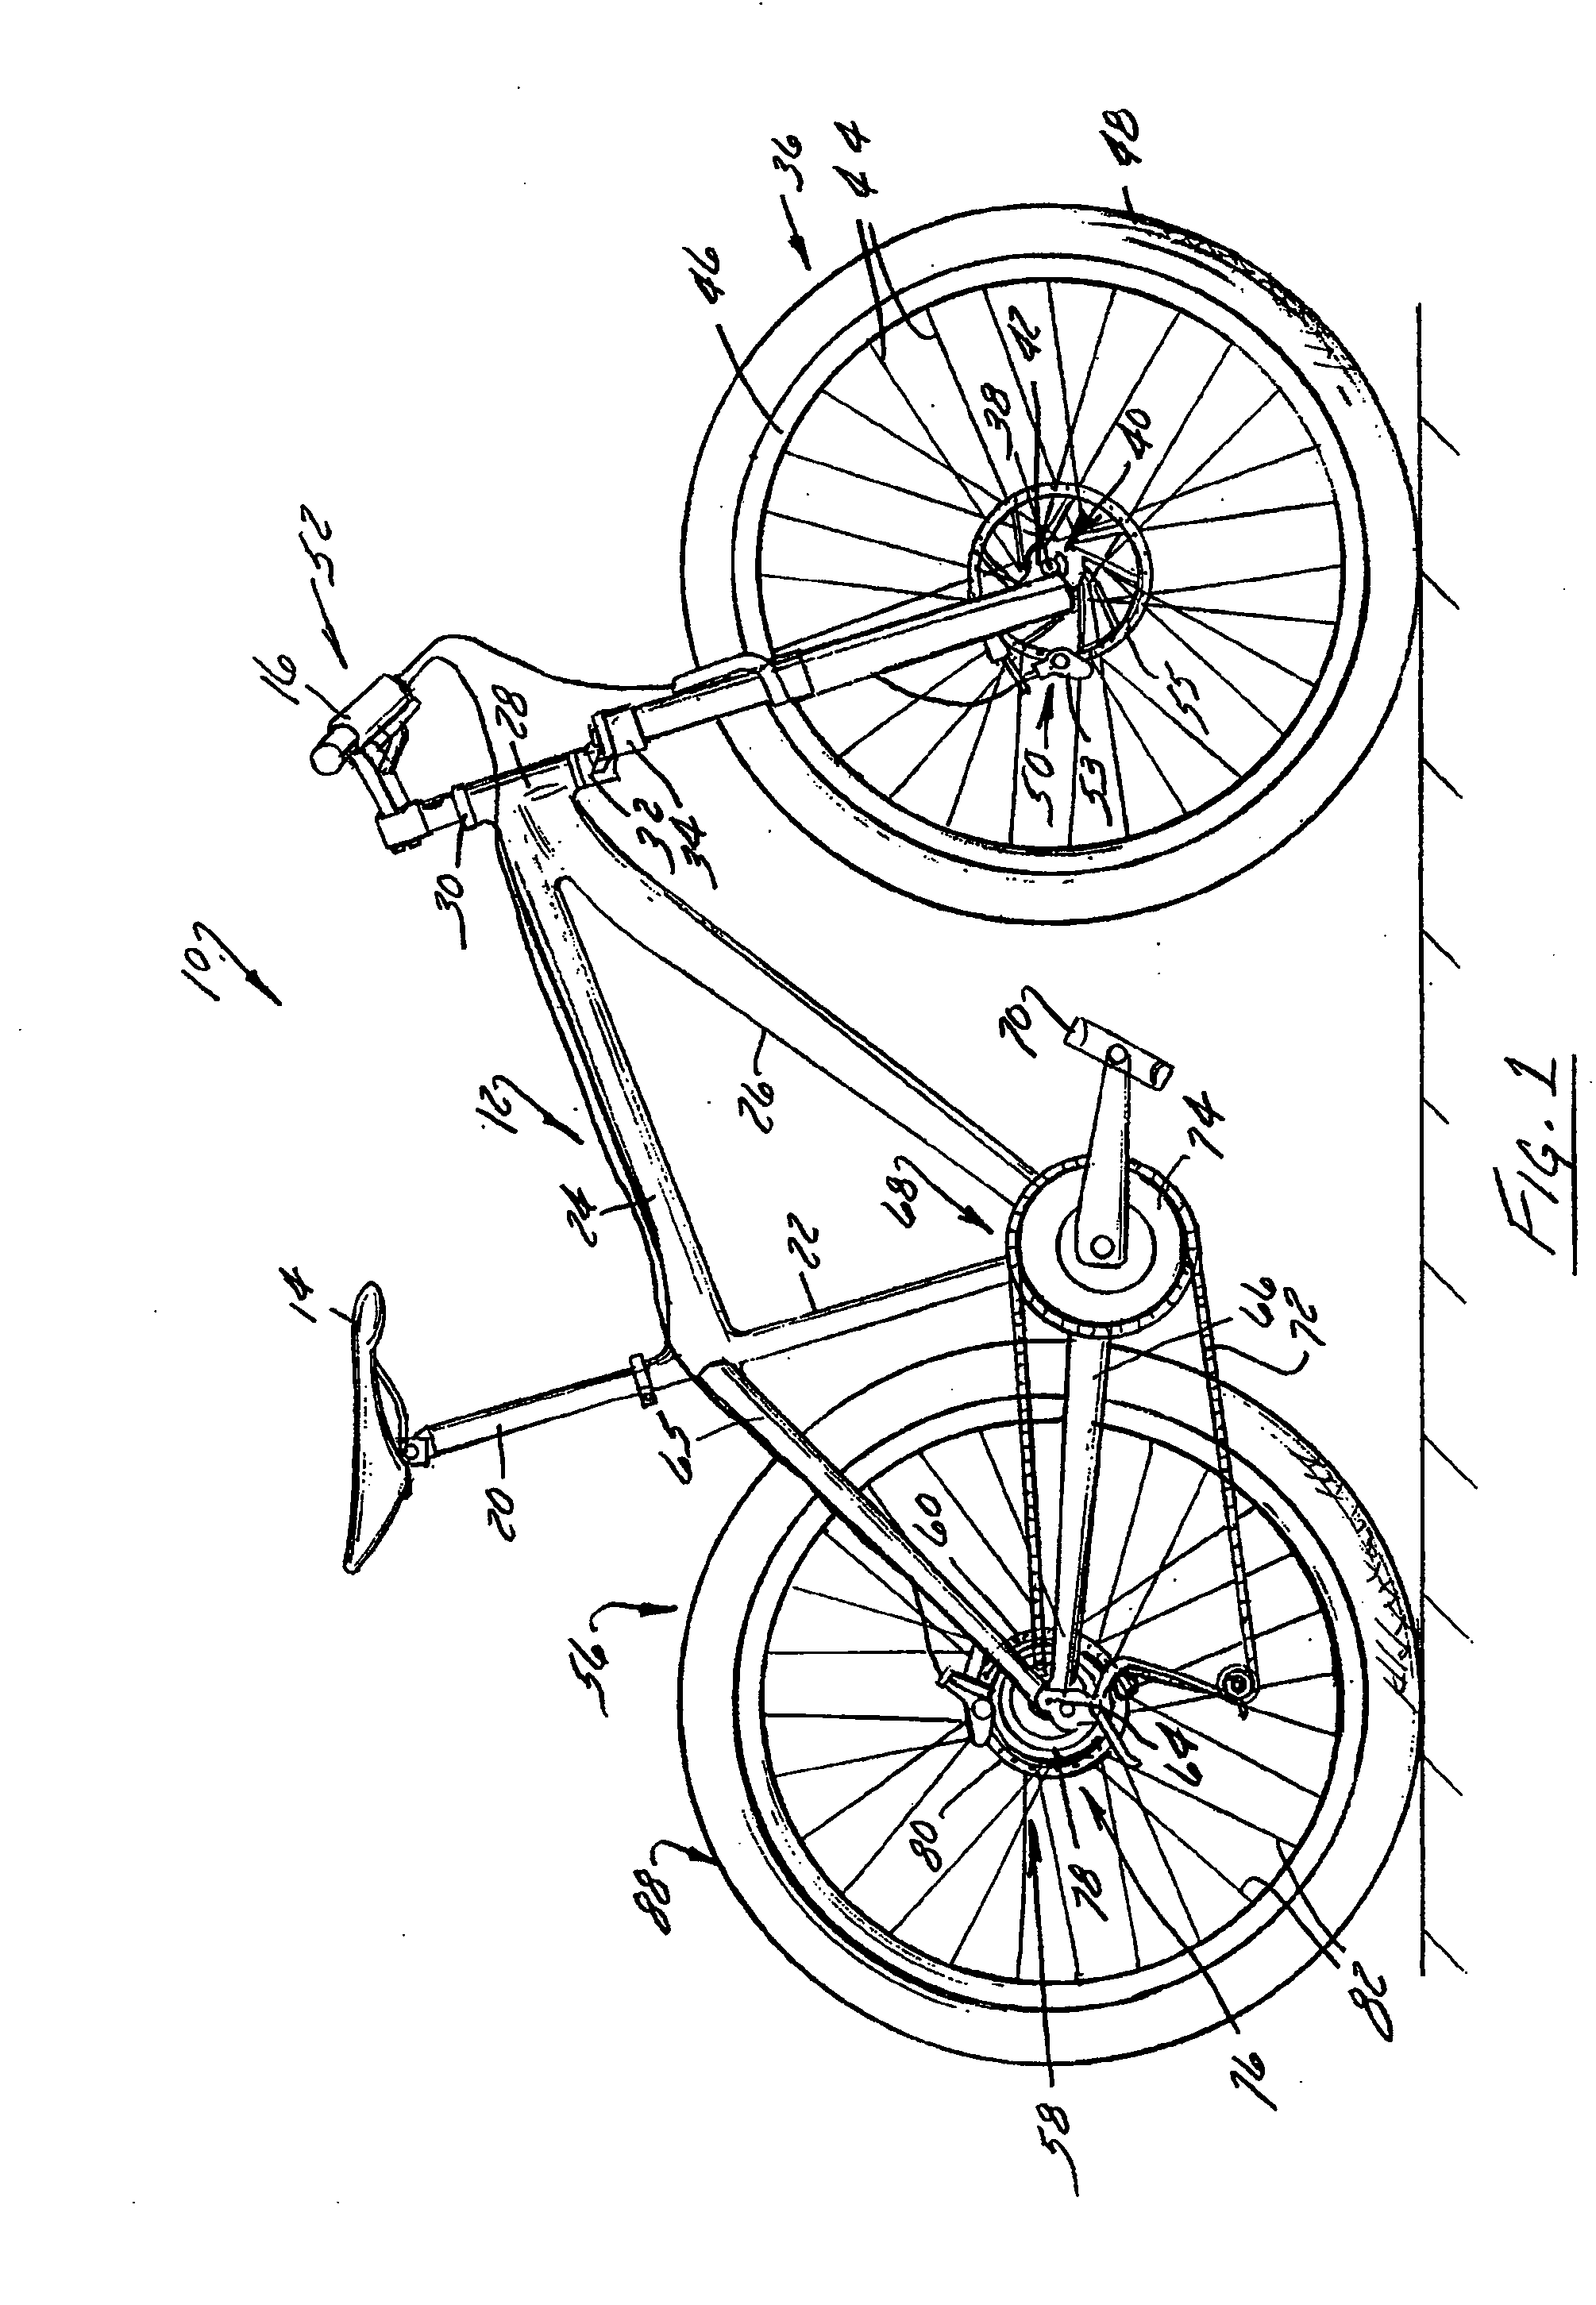 Bicycle wheel assembly having dissimilar lateral spoke lacings